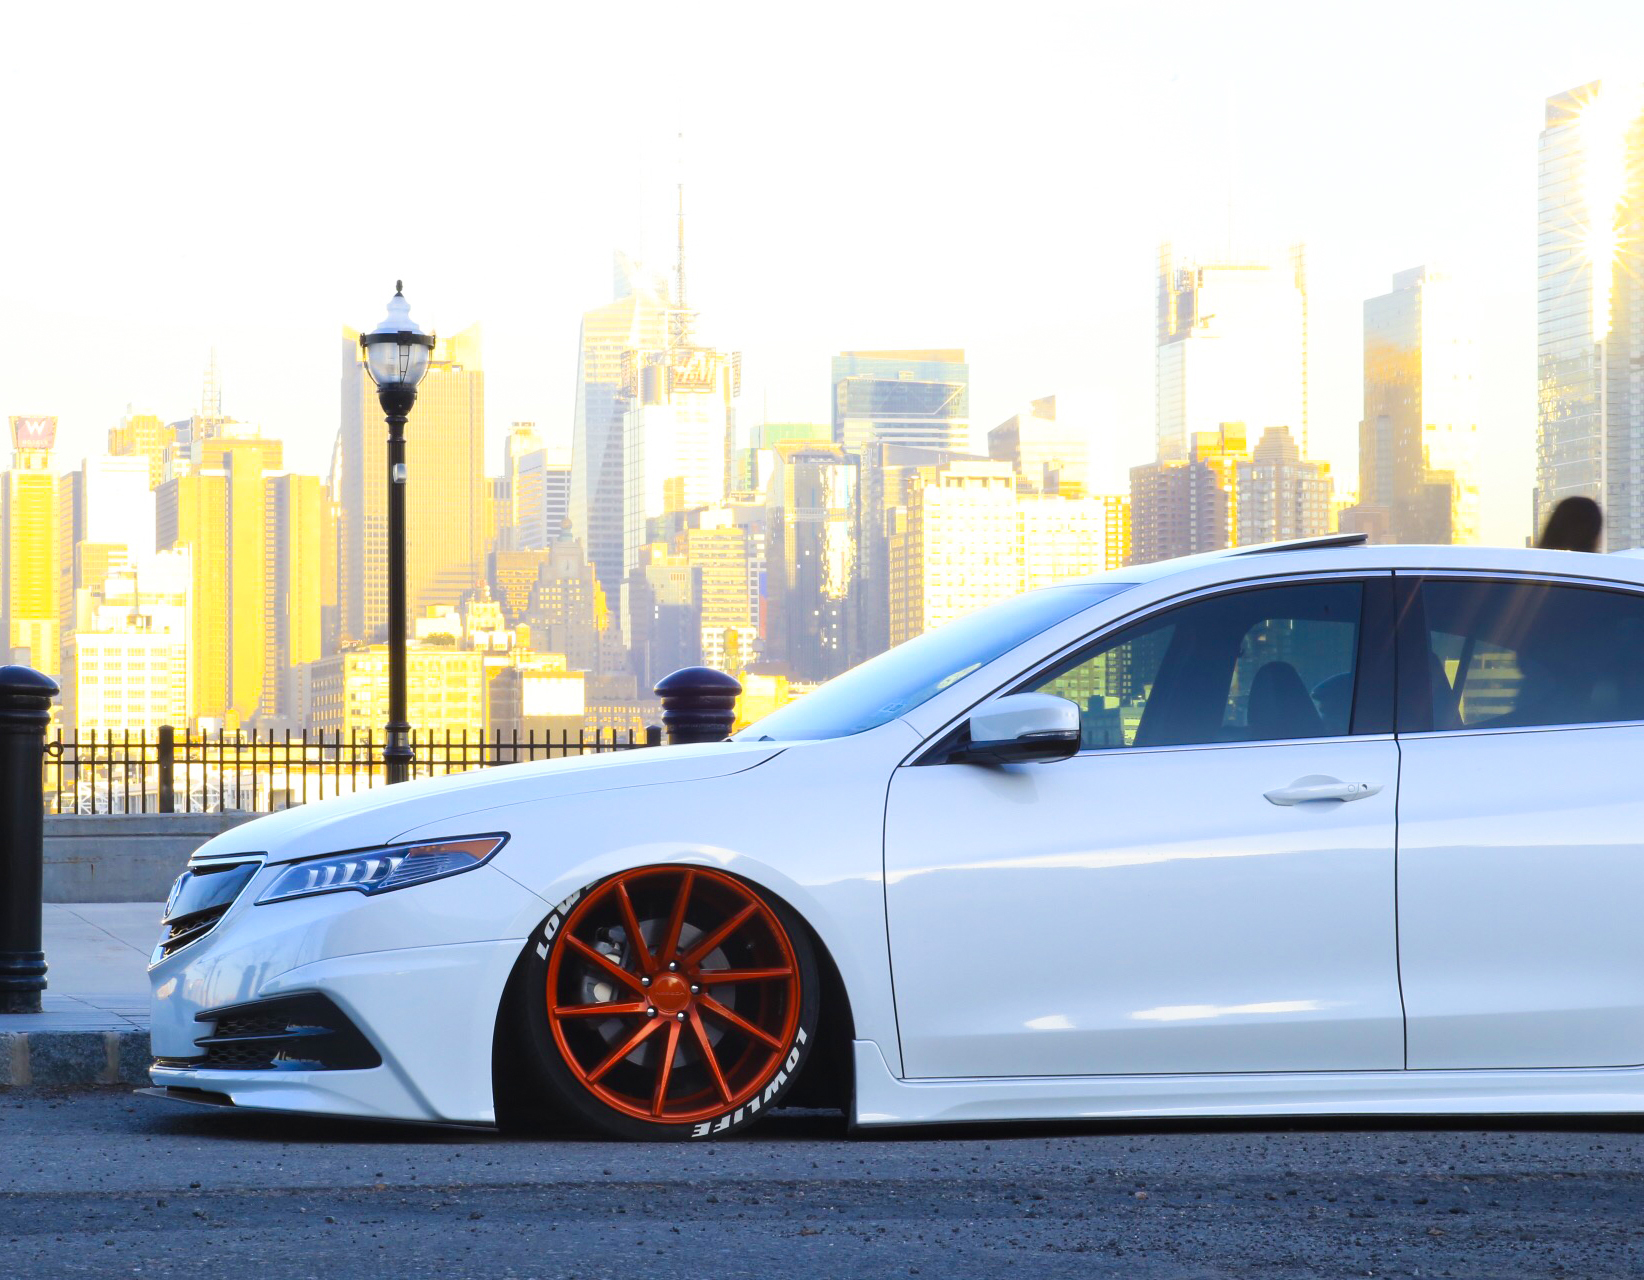 air suspension kits offer a smooth ride and sleek look